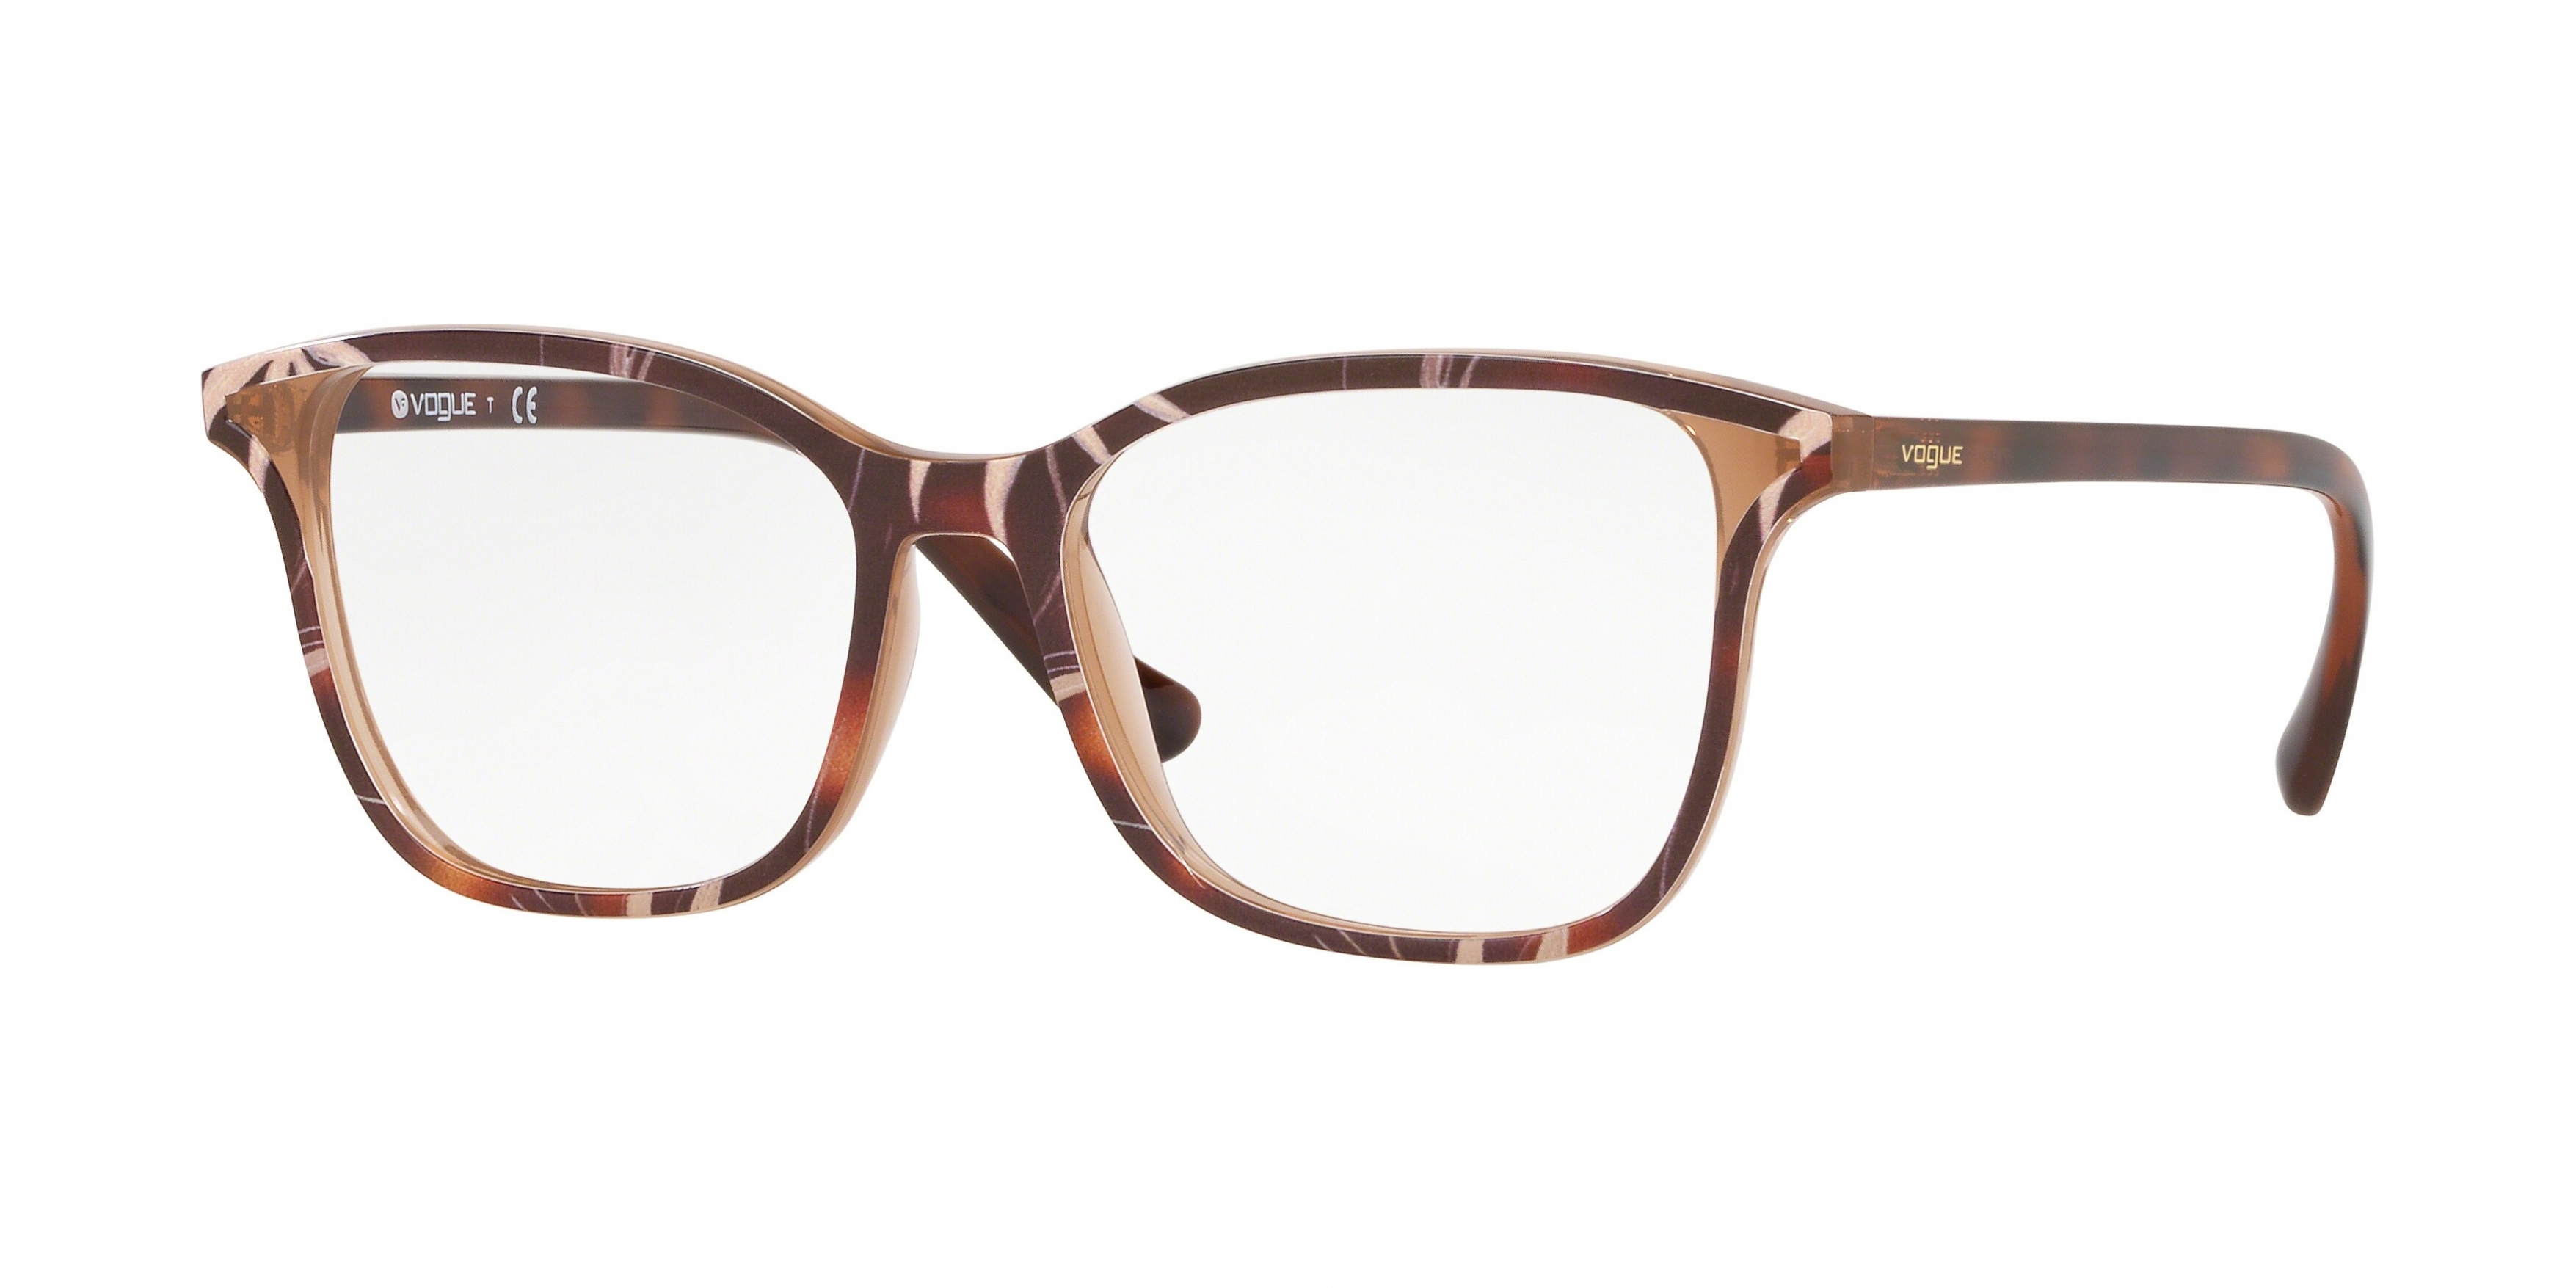 Buy Vogue Eyeglasses directly from